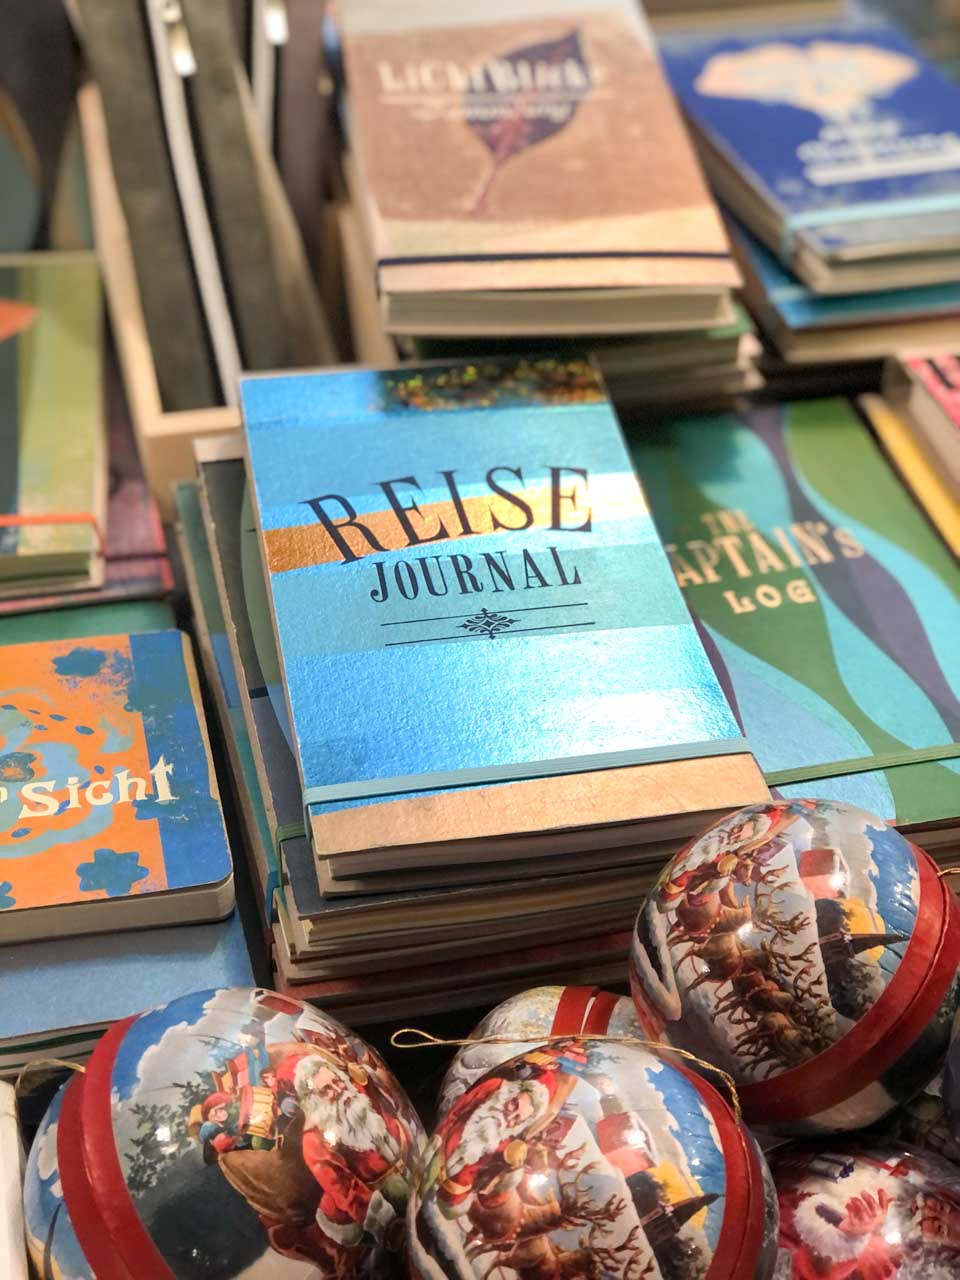 An assortment of travel journals with colourful covers next to decorative Christmas baubles on offer at the Nuremberg Christmas Market